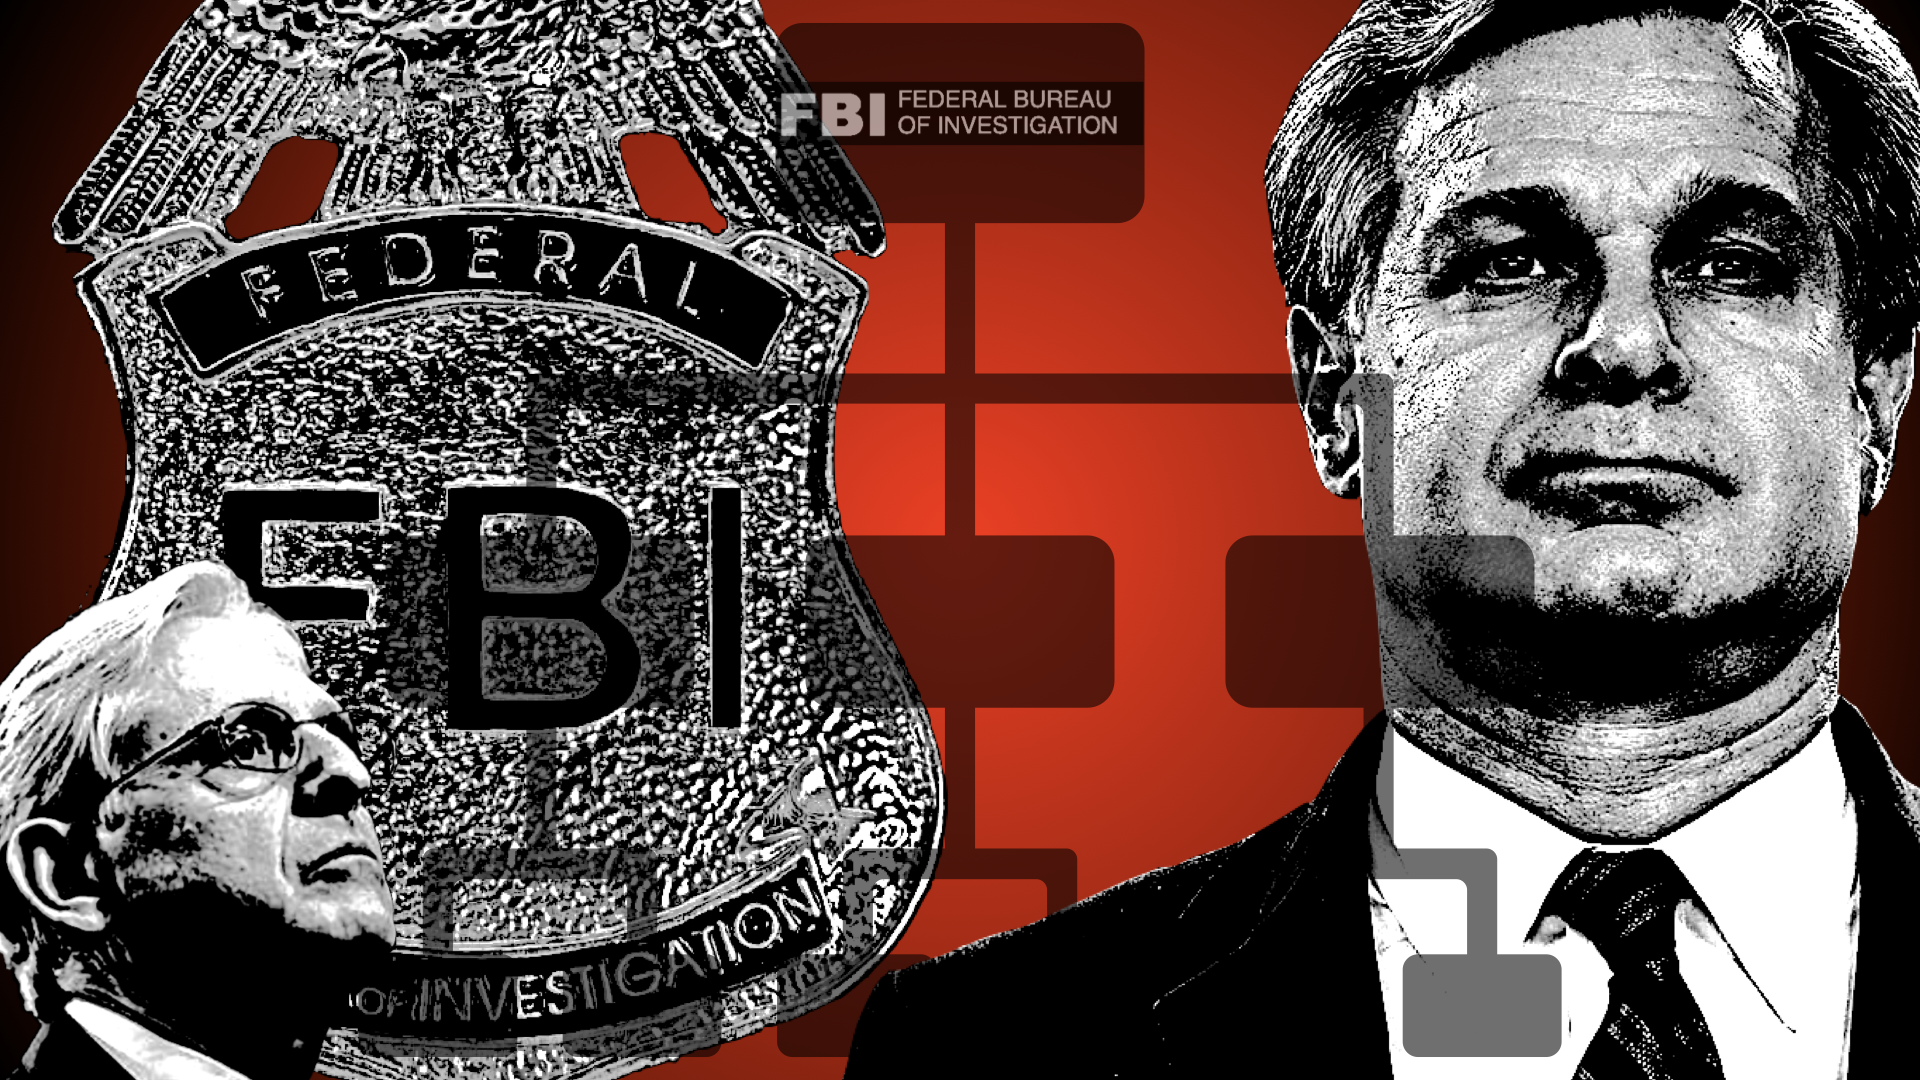 FBI Goes Top-Down to Install Two-Tiered Justice at Local Levels, Wray Perfect Point Man